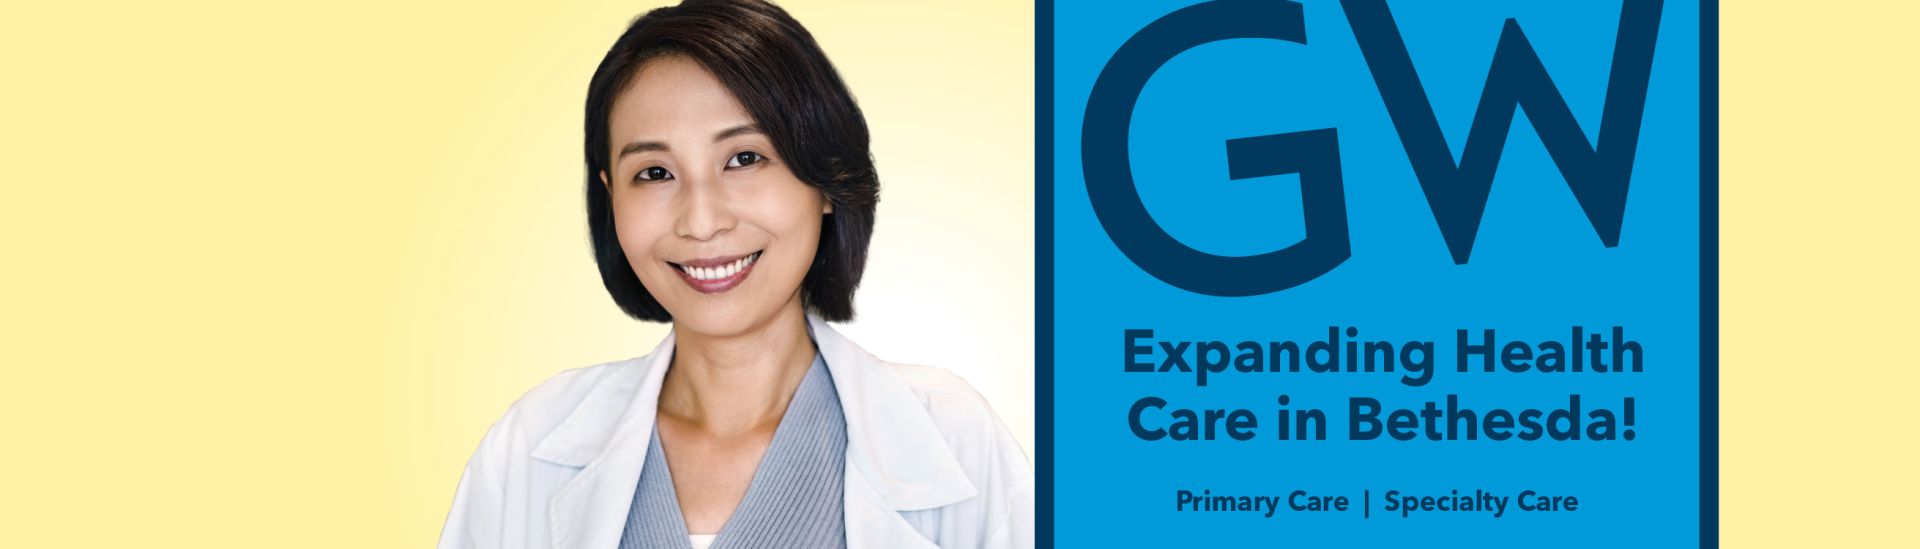 GW expanding health care in Bethesda - Primary and Specialty Care | provider wearing white coat